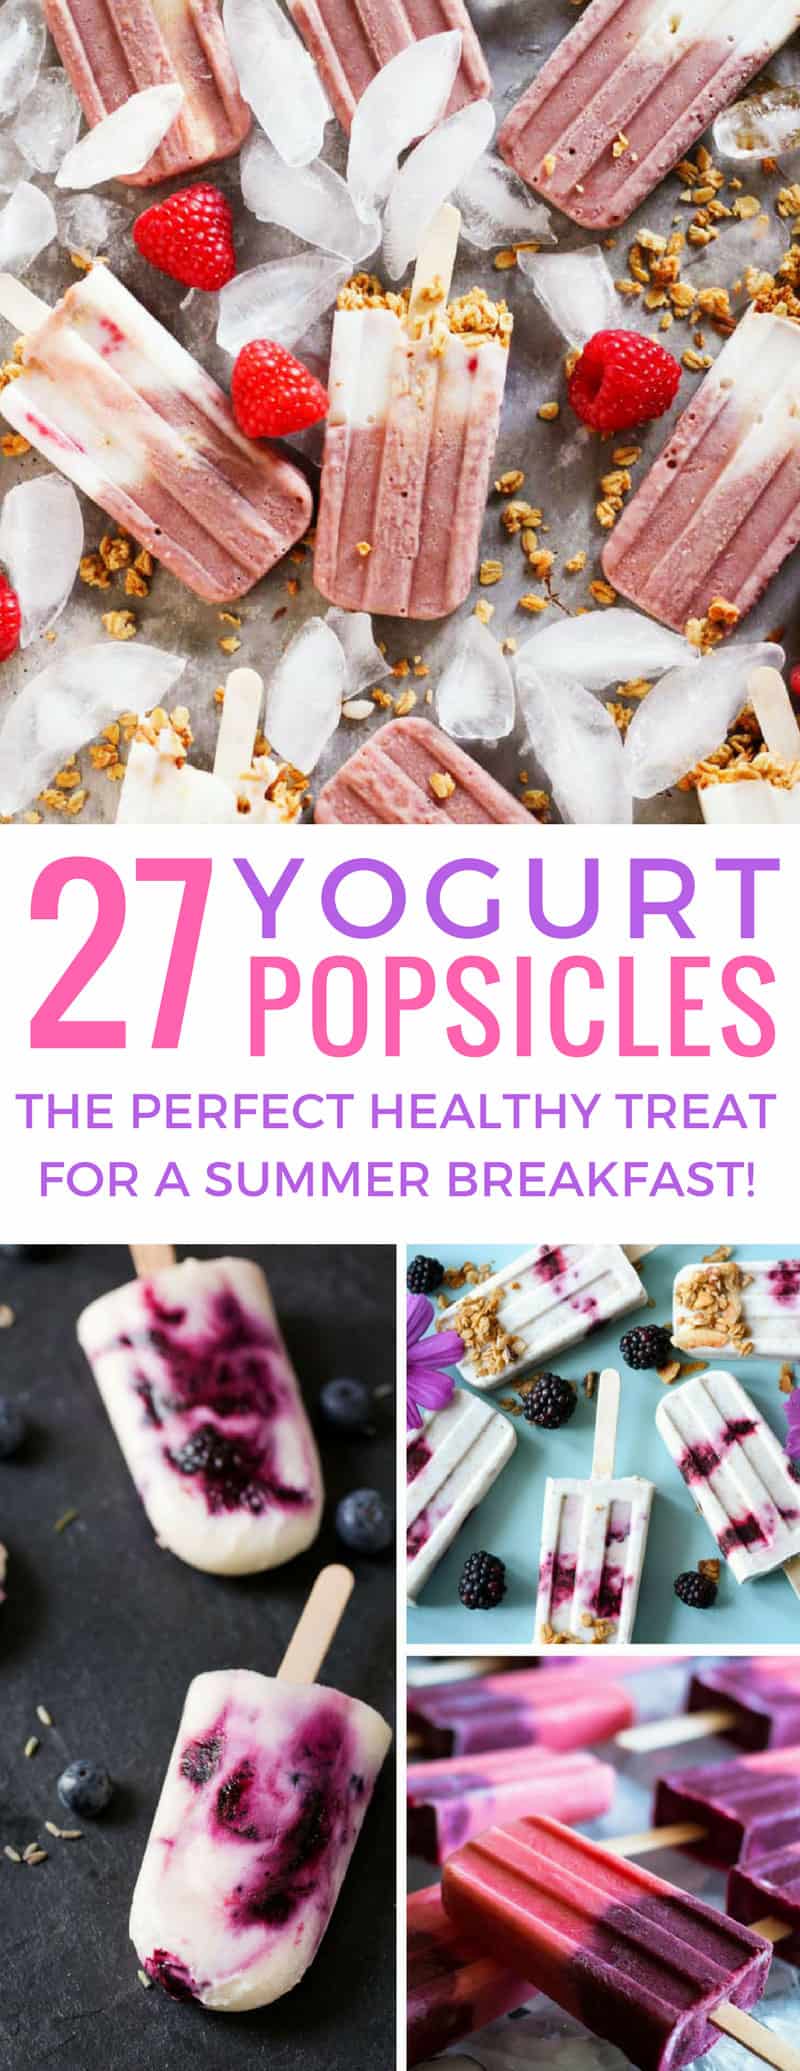 Love these yogurt popsicles and because they're healthy I don't feel guilty about serving them for breakfast! Thanks for sharing!